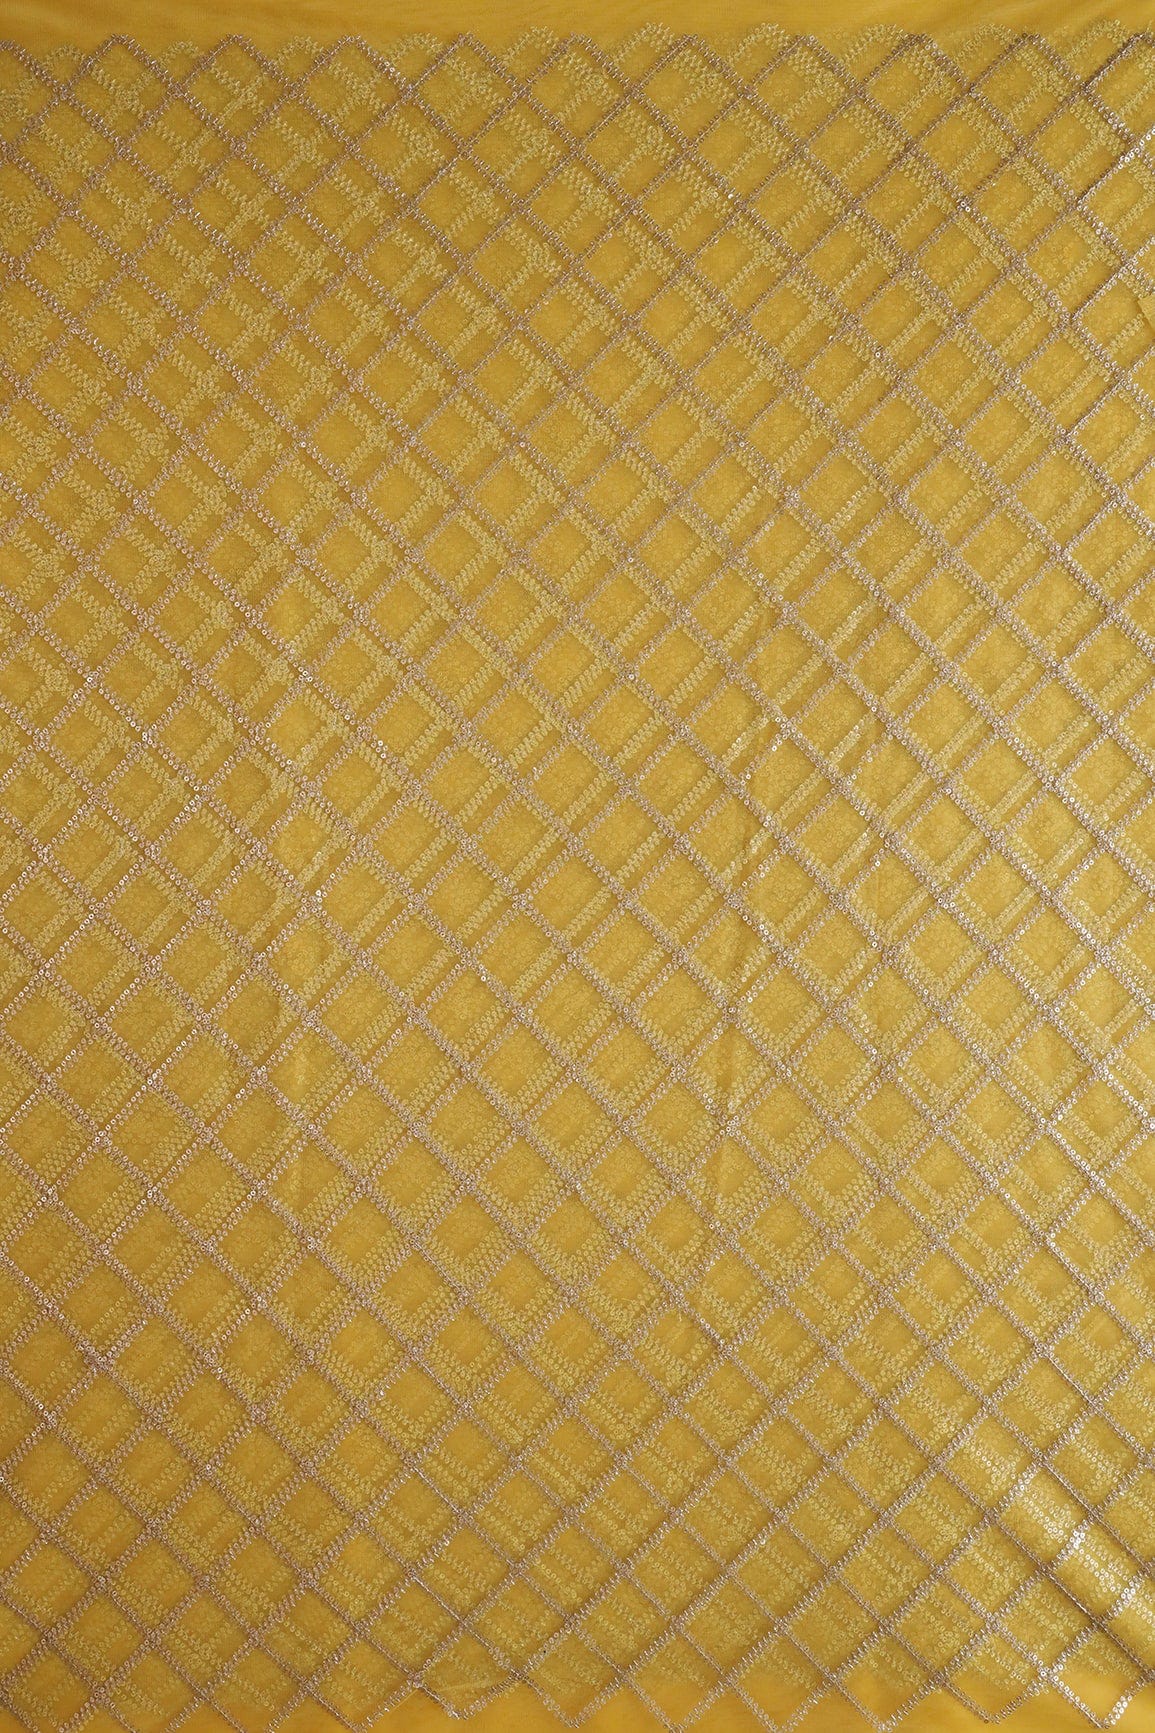 doeraa Embroidery Fabrics Gold Sequins With Gold Zari Beautiful Checks Embroidery On Yellow Soft Net Fabric